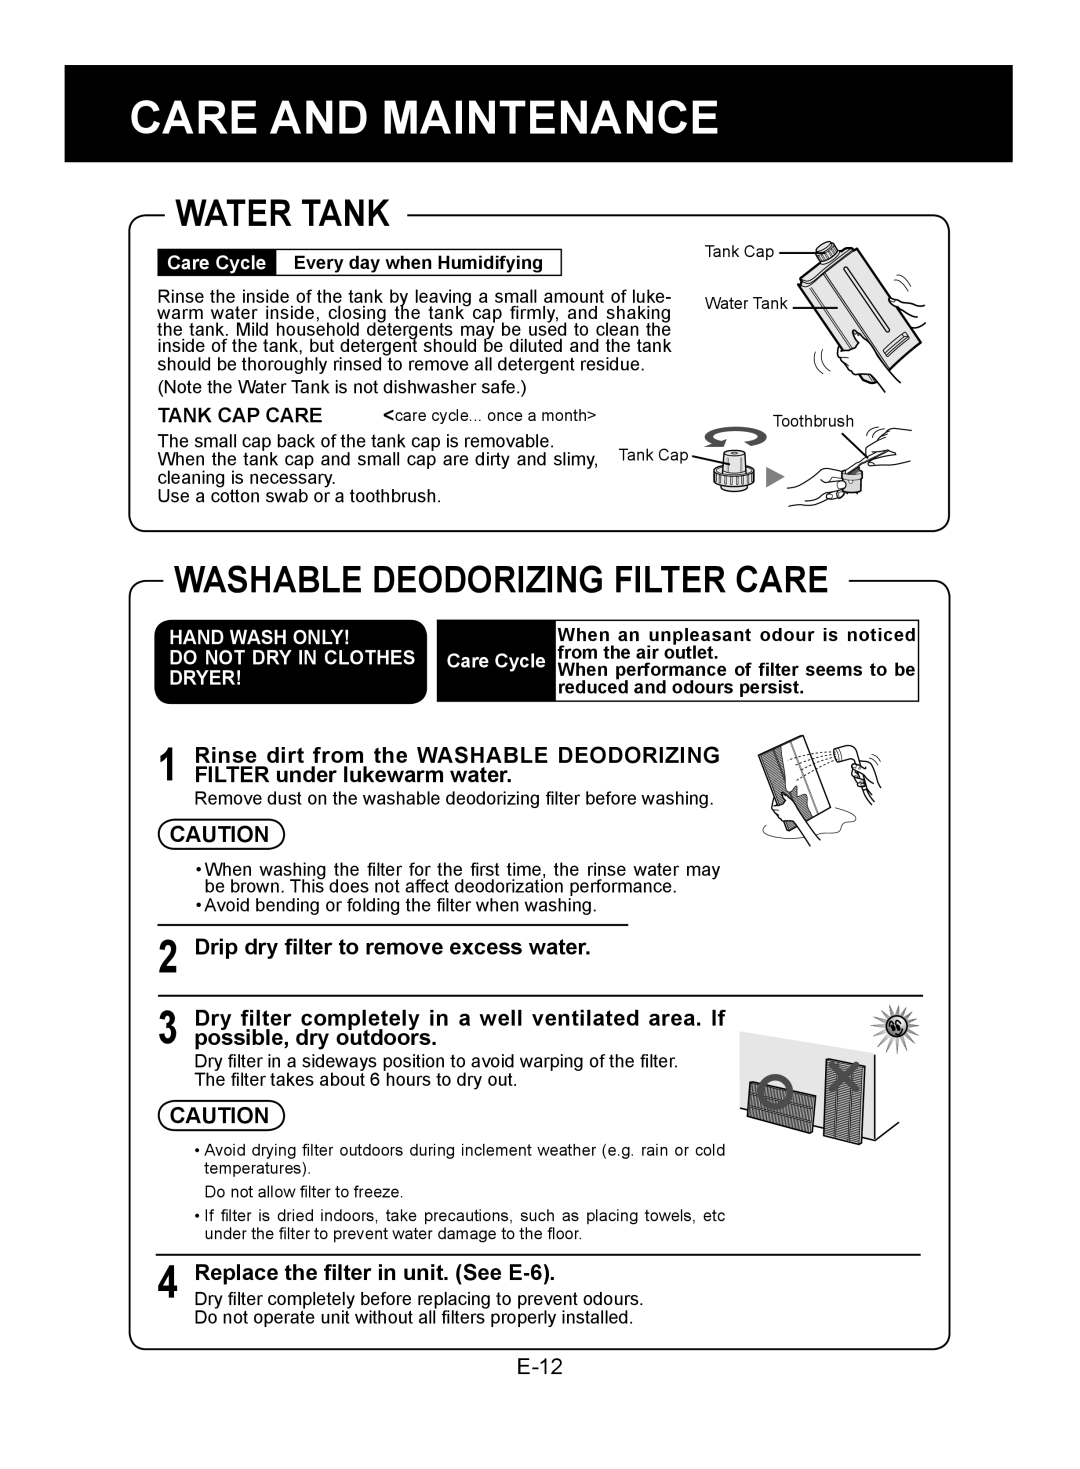 Sharp KC-860EK Water Tank, Washable Deodorizing Filter Care, Drip dry filter to remove excess water, E-12, Care Cycle 